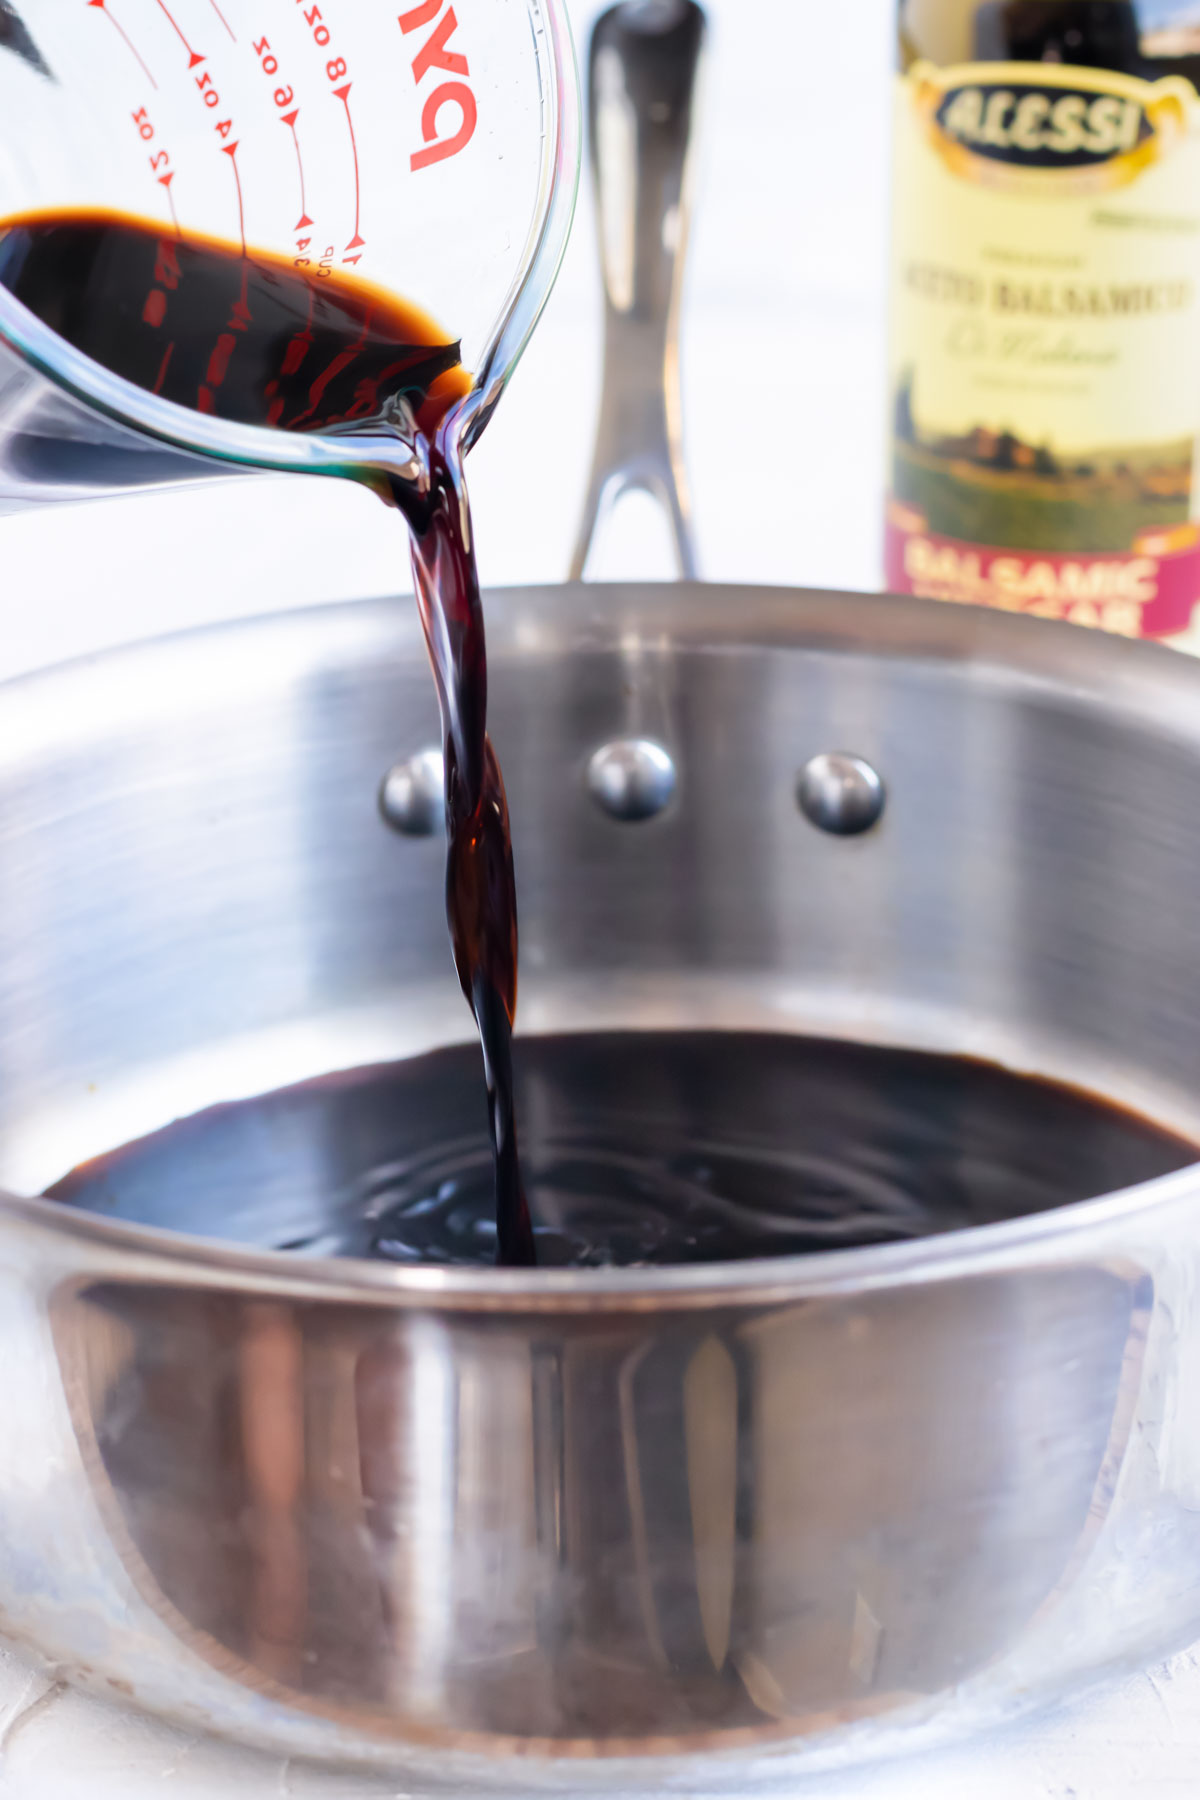 Balsamic vinegar of Modena being poured into a stainless steel saucepan for a balsamic reduction recipe.